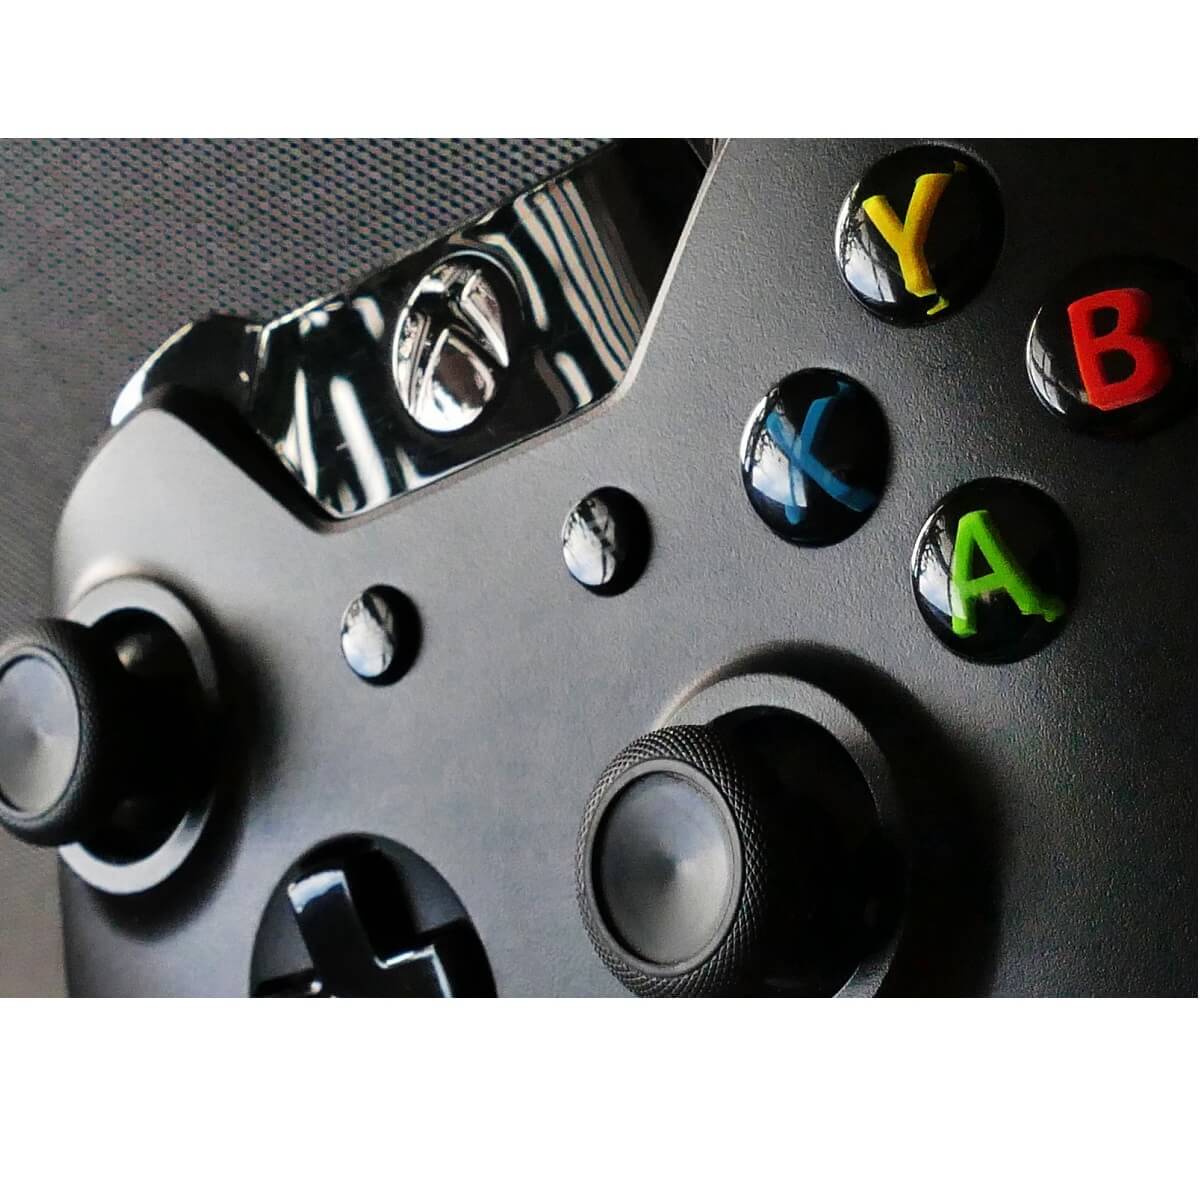 Xbox One eject button